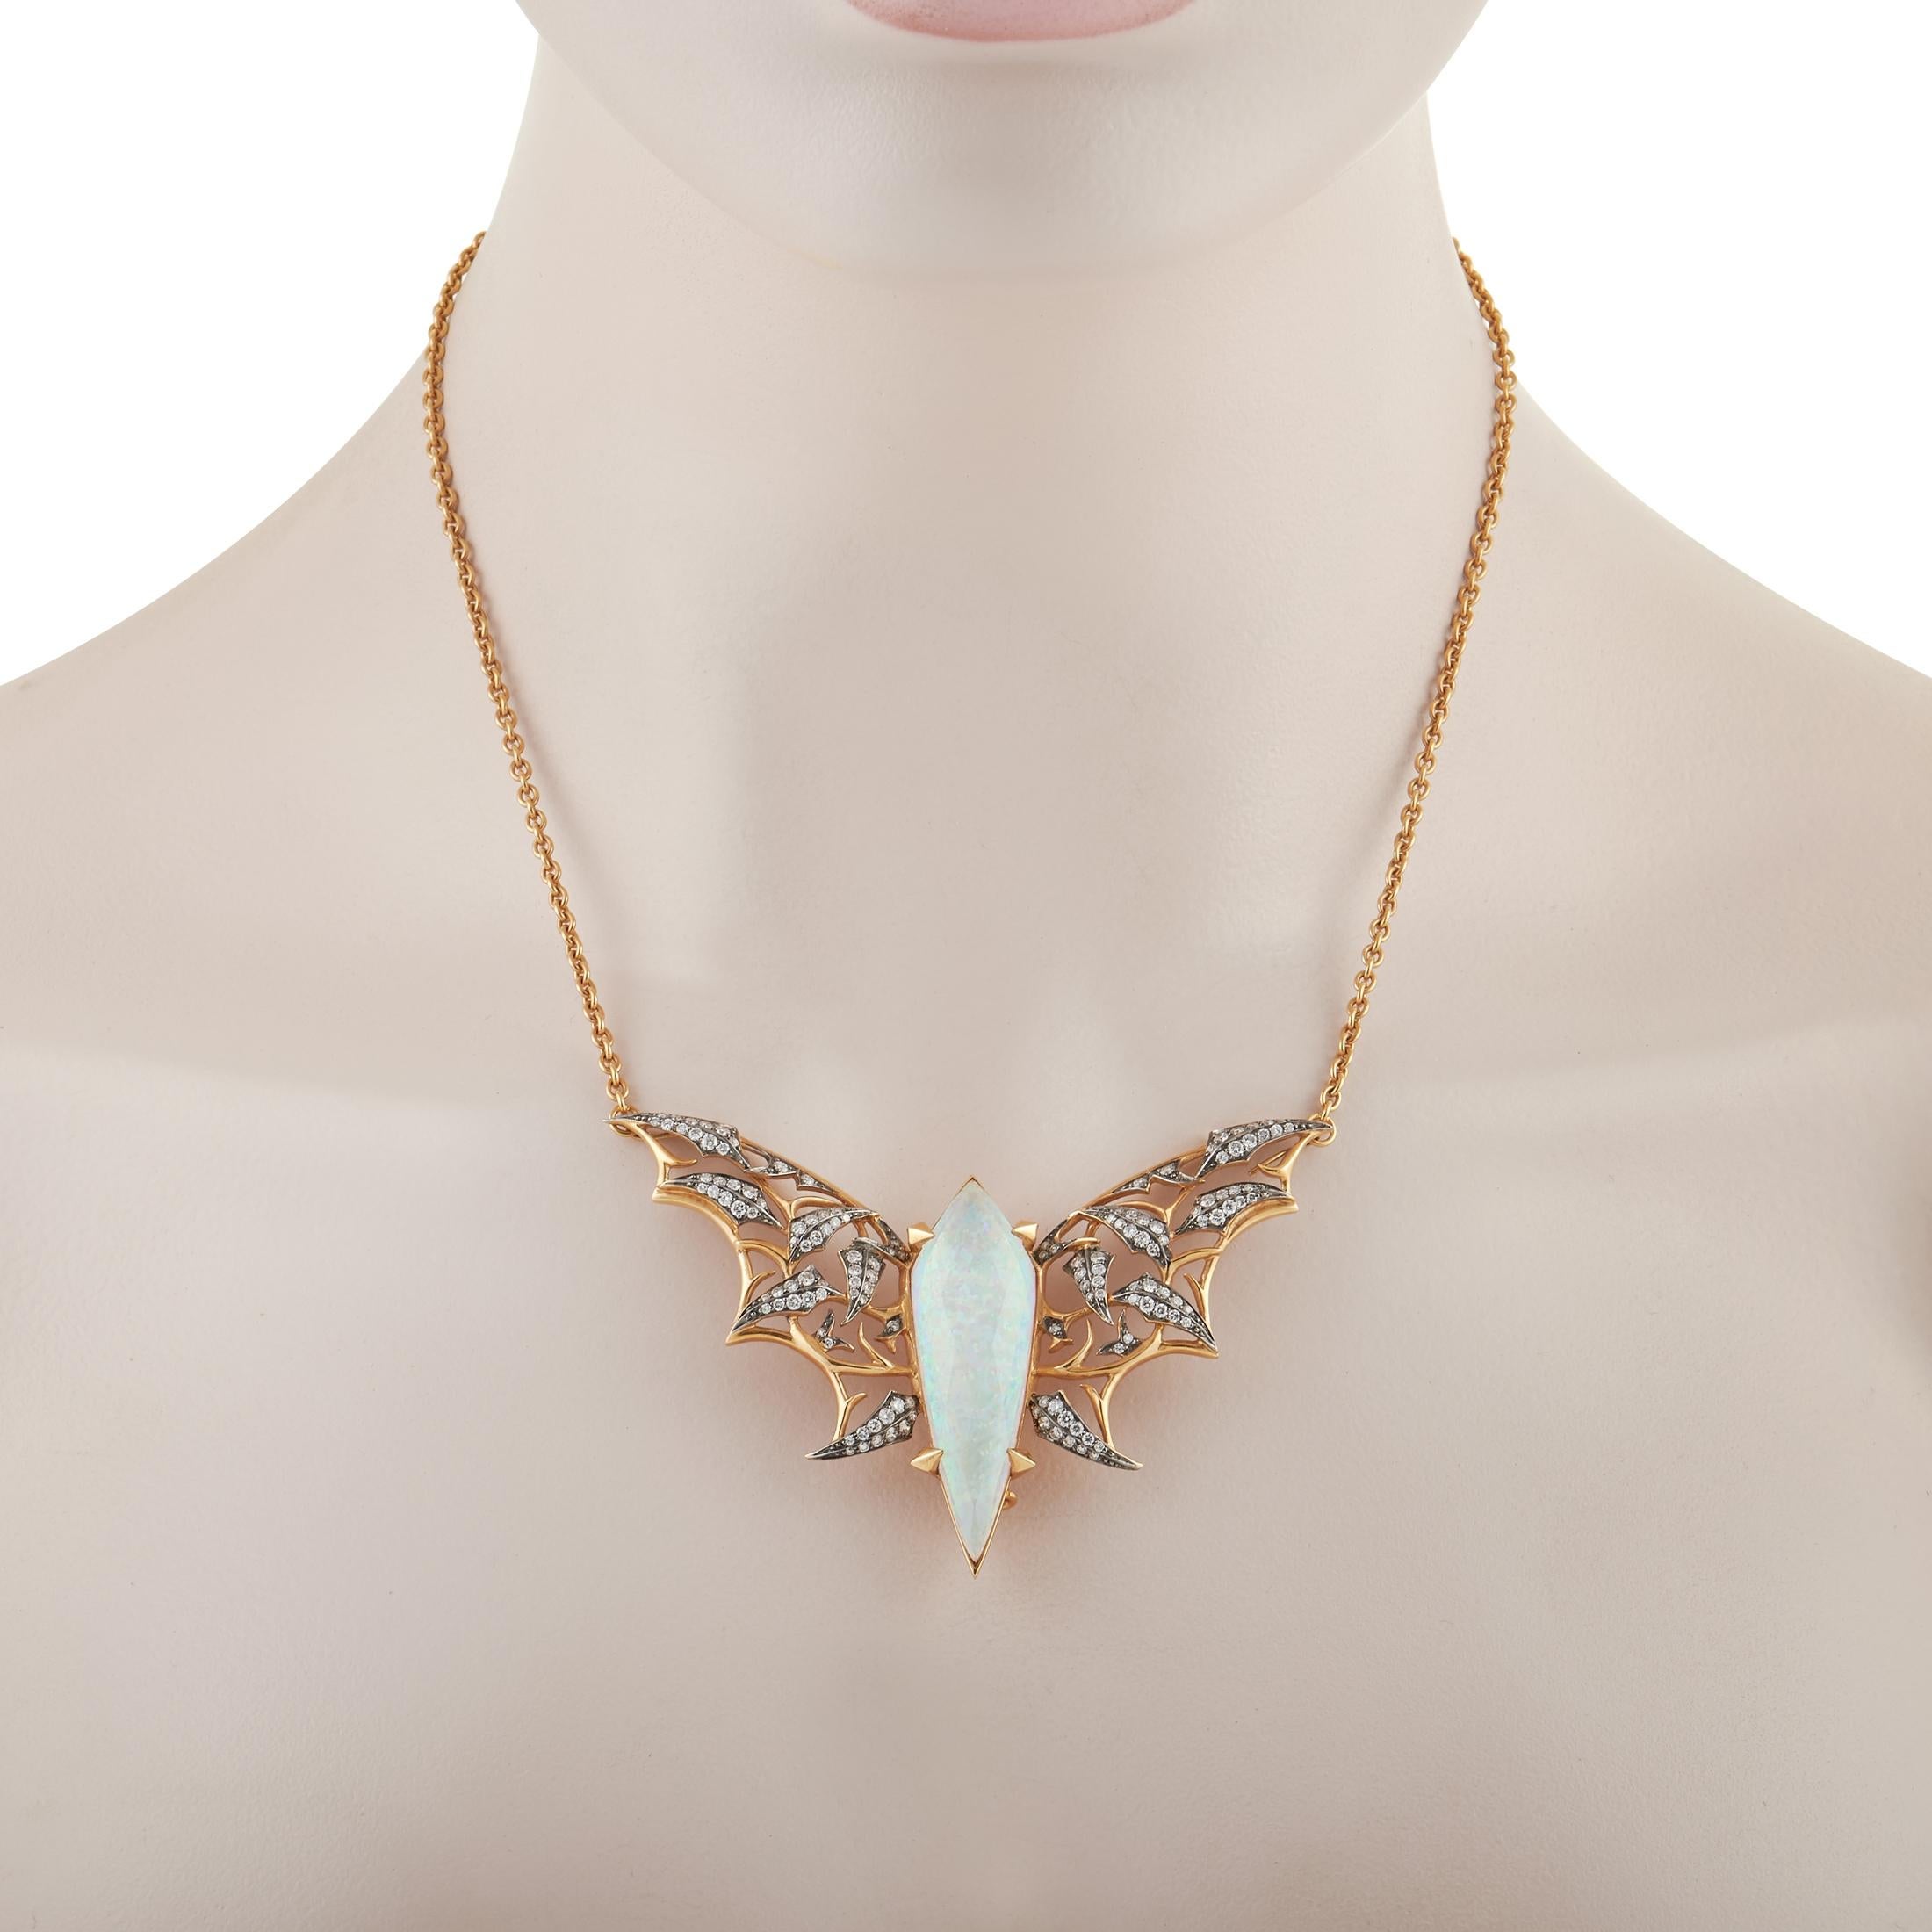 Channel your darker side by adding this elegant pendant necklace from Stephen Webster into the mix. Attached to an 18K Yellow Gold chain measuring 14.5”, you’ll find an intricate “bat” shaped pendant that measures 2.13” long and 3” wide. The wings